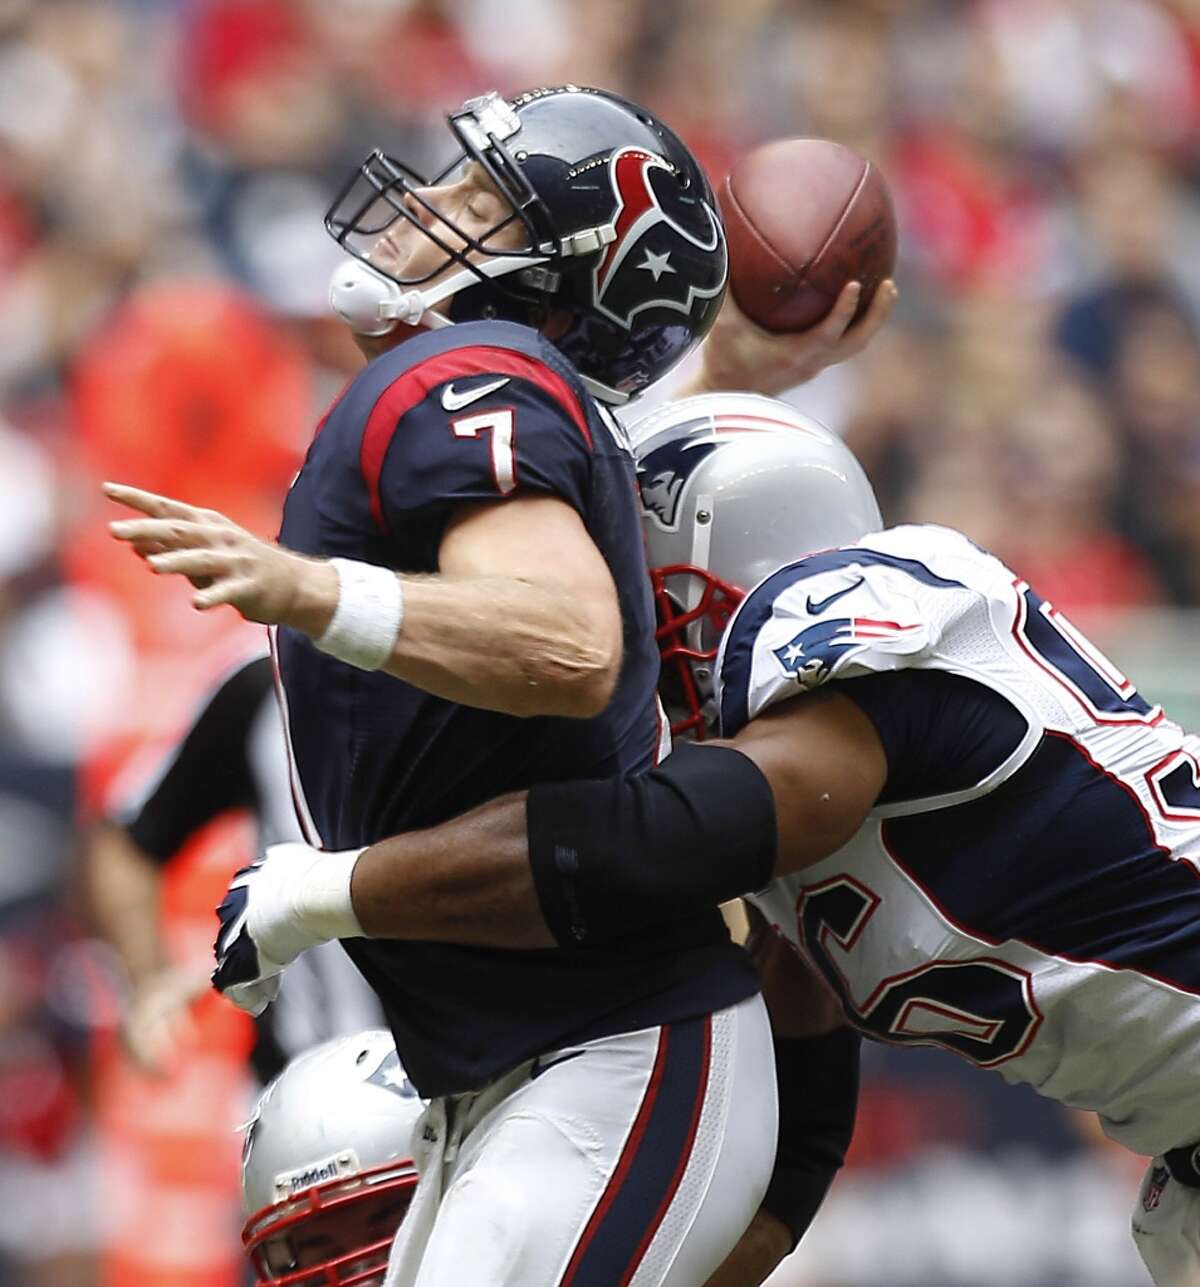 Texans quarterback Case Keenum is hit by Patriots defensive end Andre Carter as he releases a pass during the second quarter.